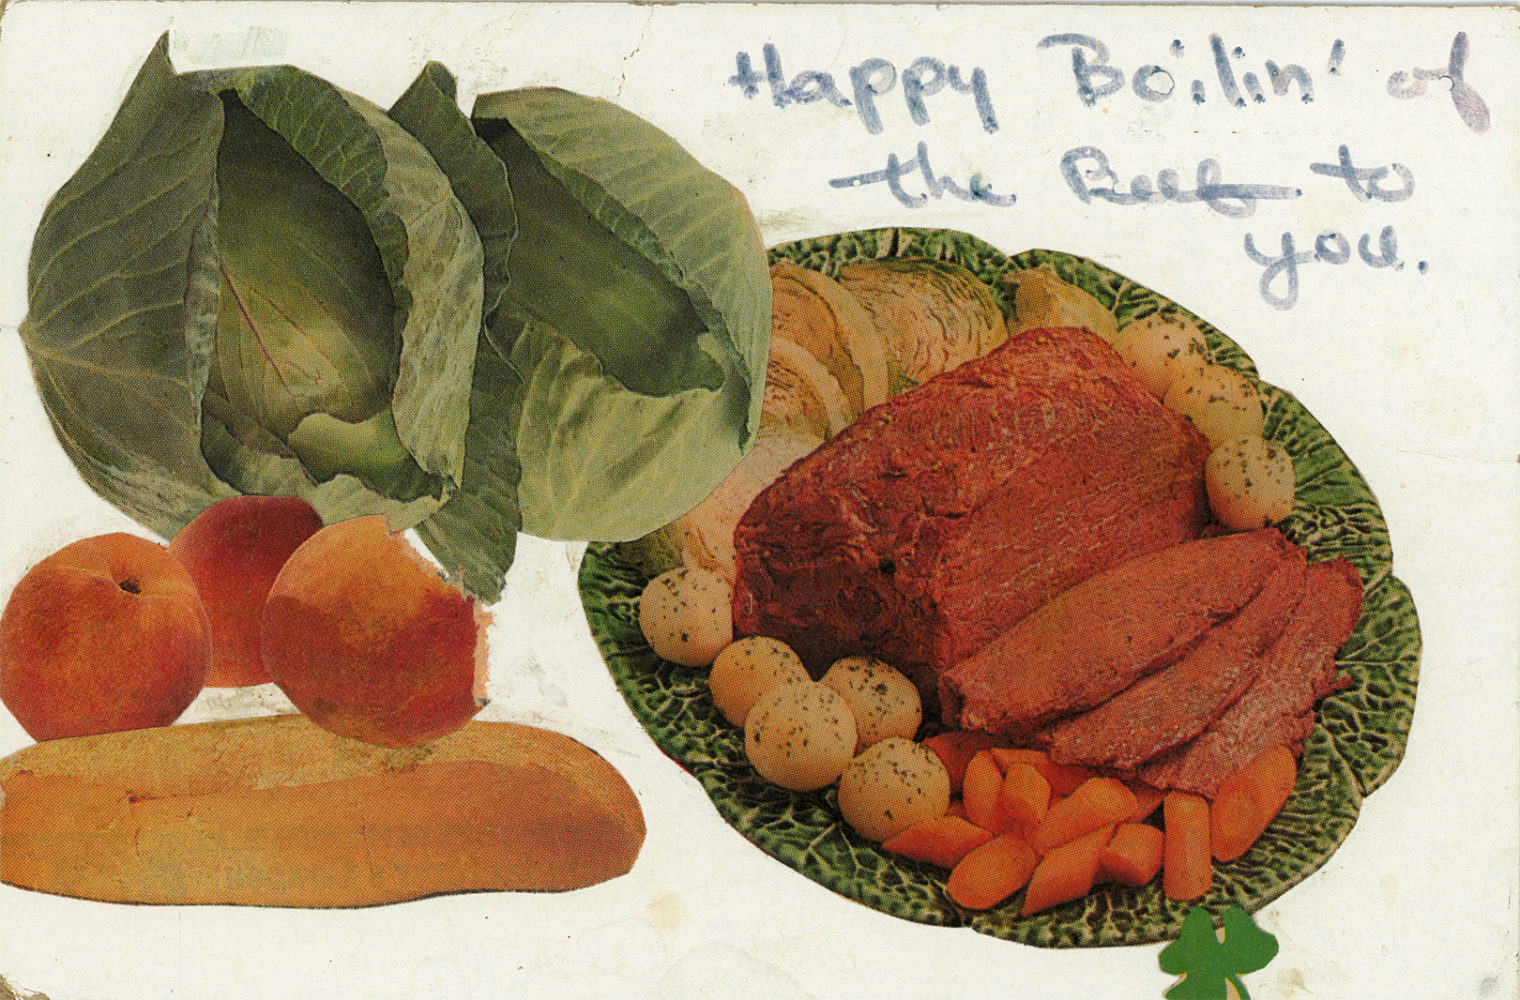 Saint Patty's Day postcard from Pete and Shelley 1992